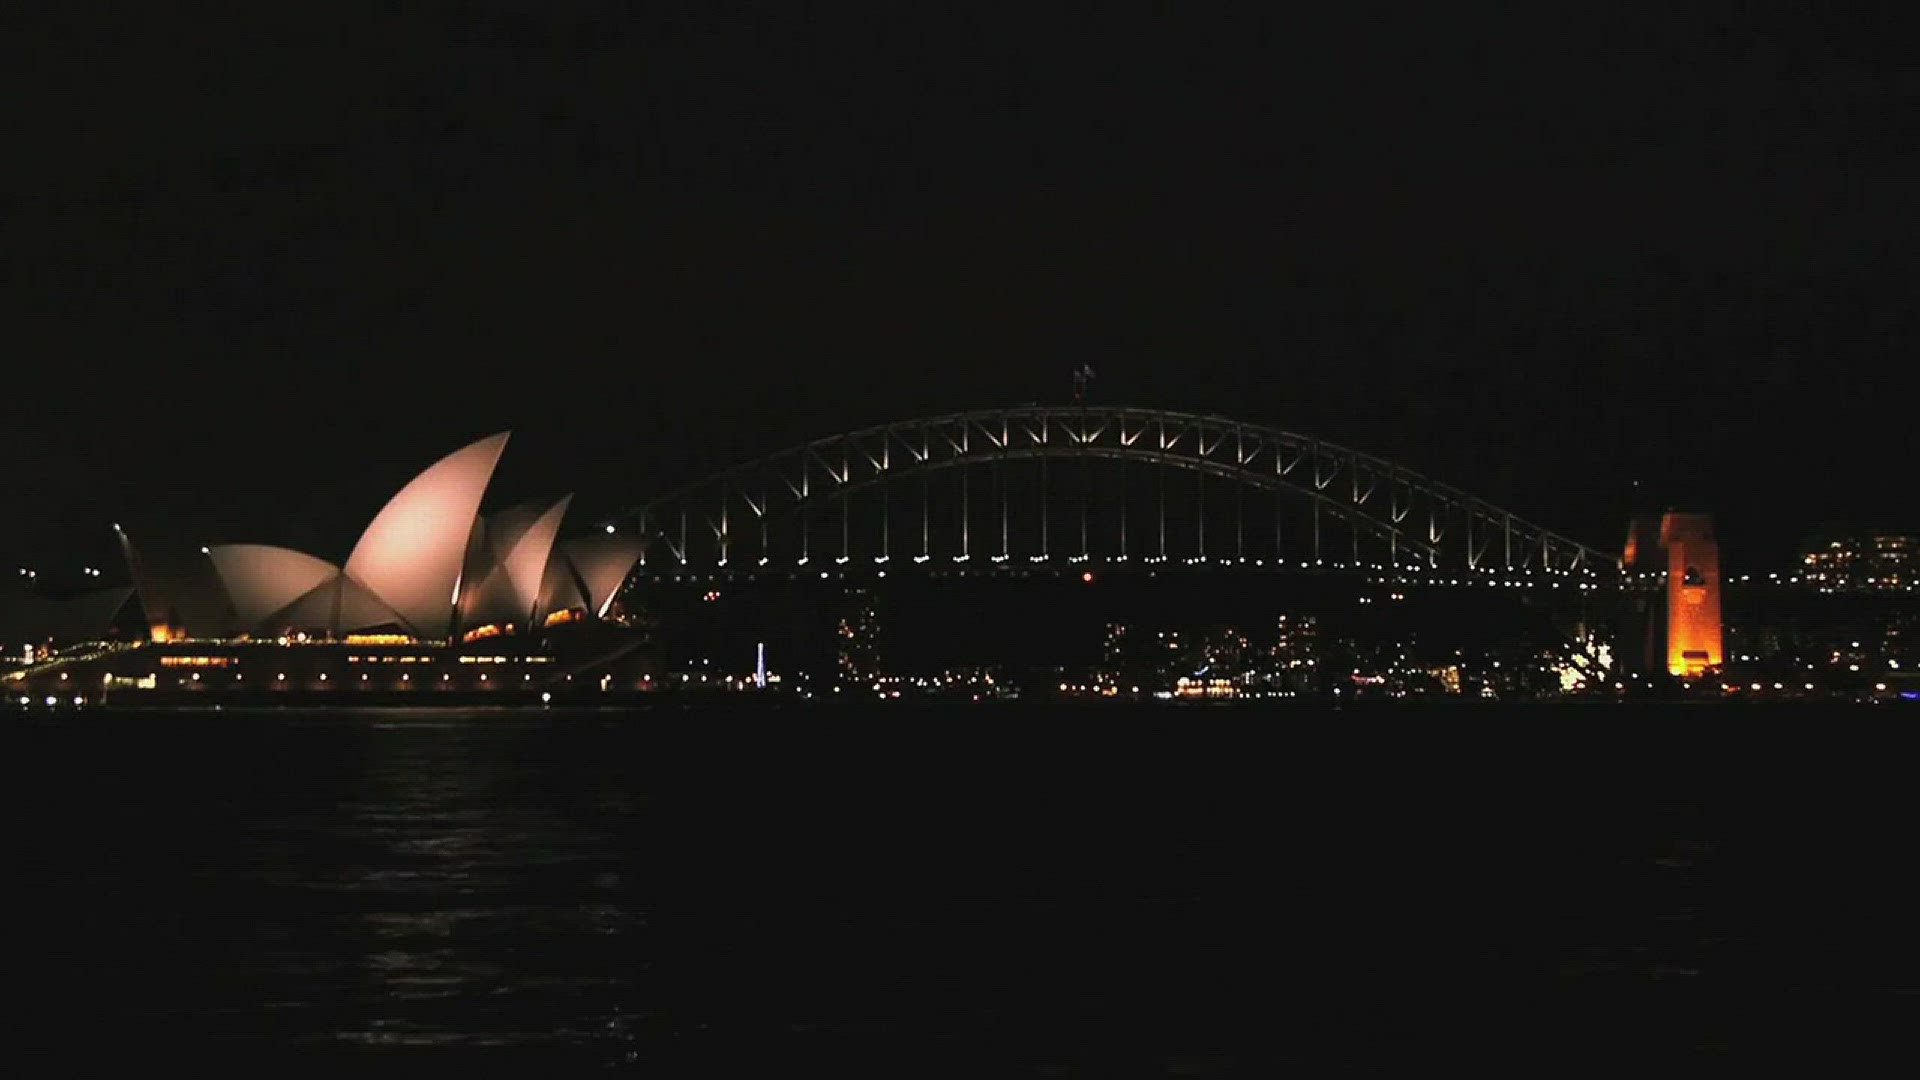 Sydney was one of the first major cities to turn off the lights on major monuments for Earth Hour. At 20:30 local time on Saturday night, the lights were turned off on the iconic Sydney Harbour Bridge and Sydney Opera House.